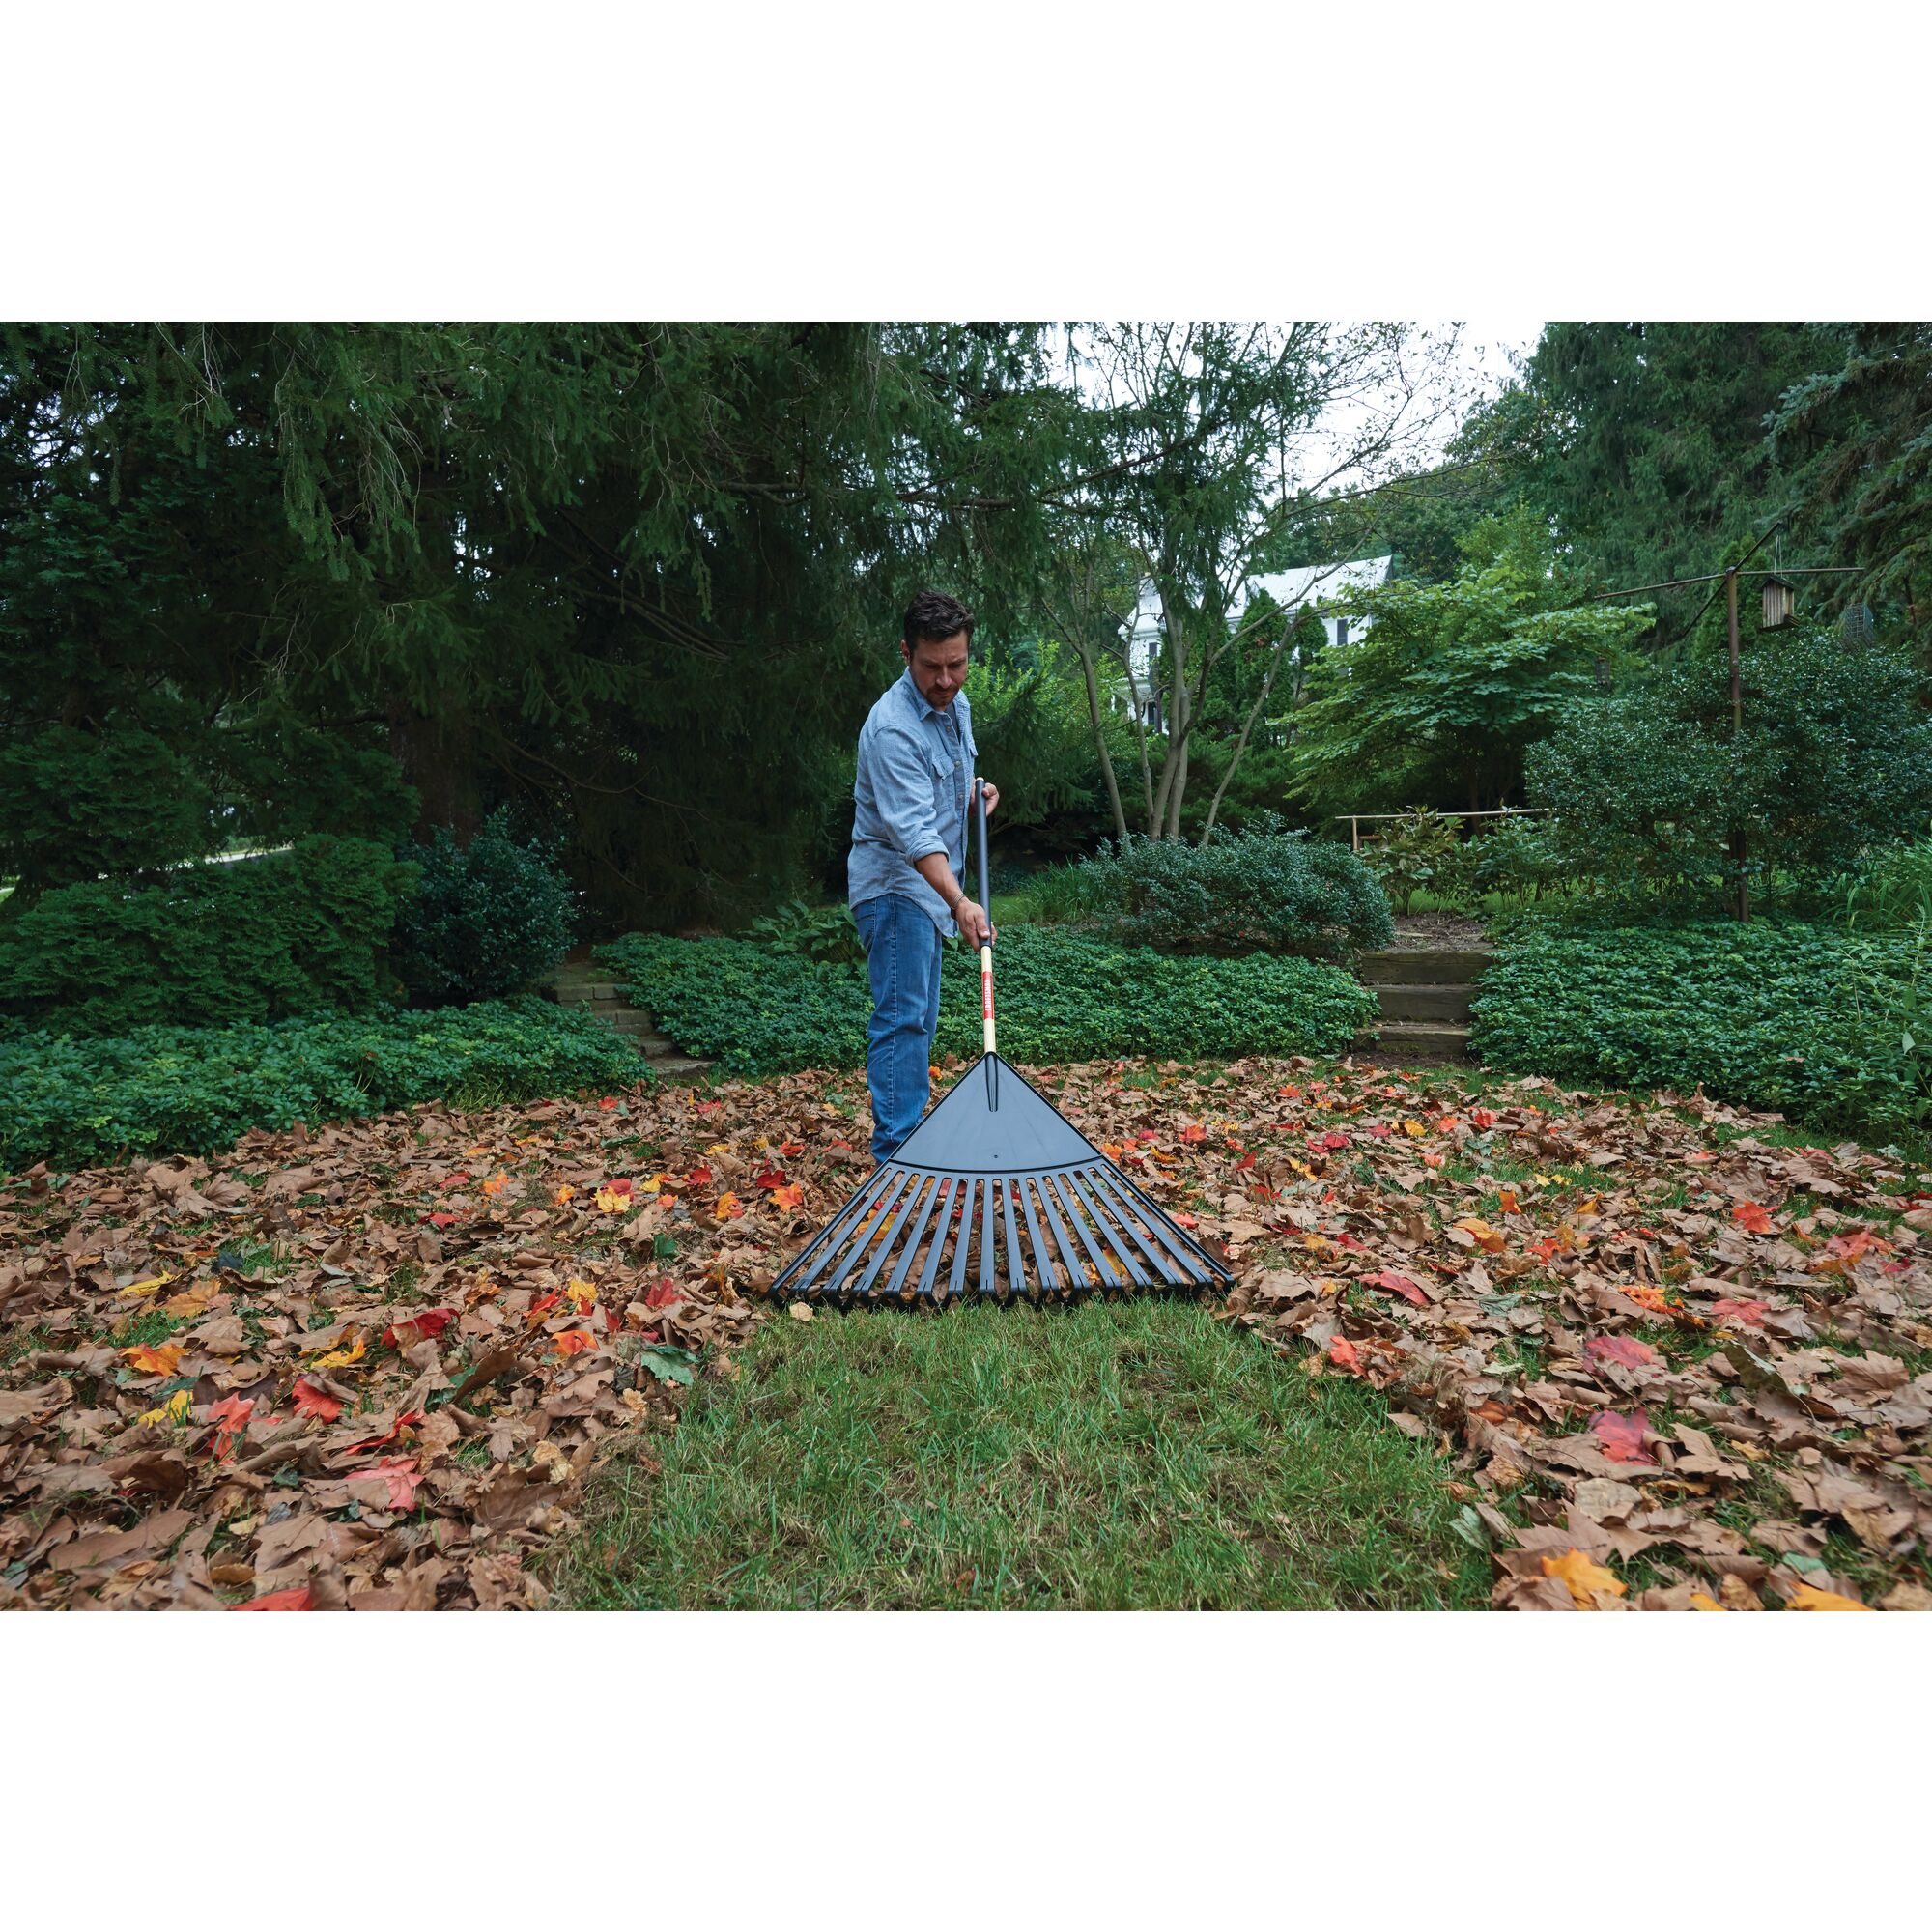 Wood handle 30 inch leaf rake being used by a person.